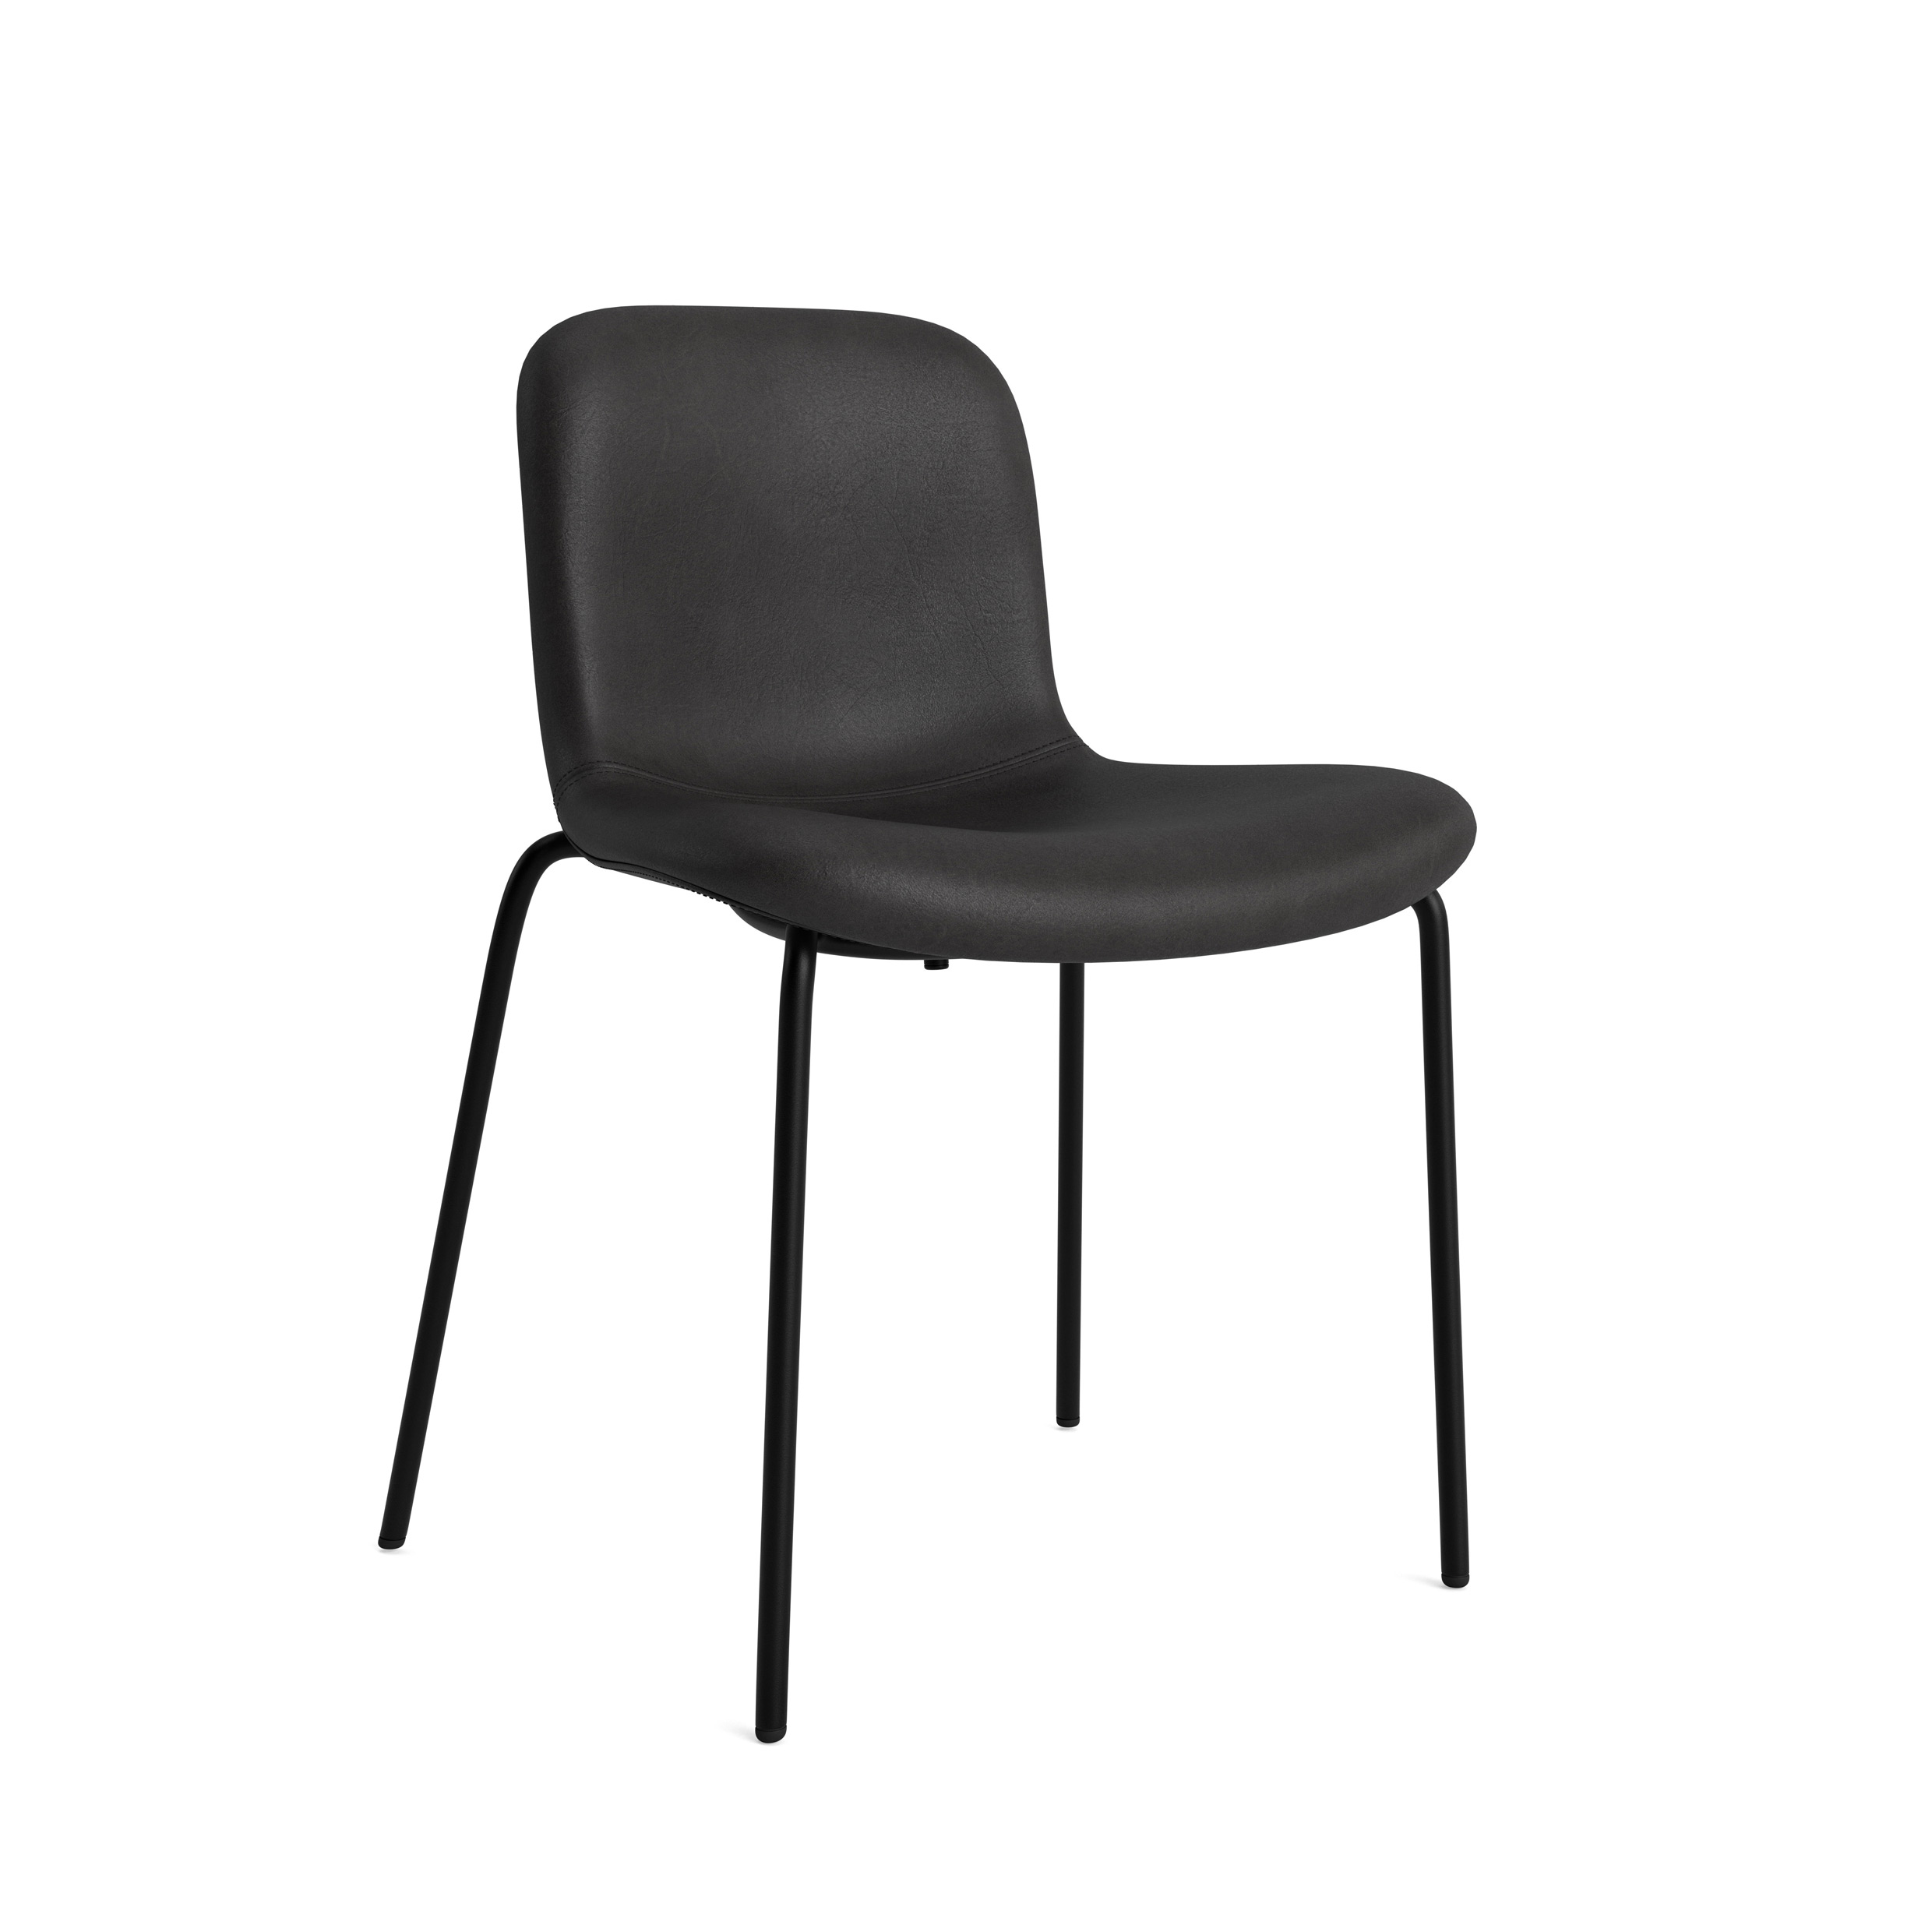 NORR11 // LANGUE - CHAIR | STEEL BLACK | SOFT LEATHER DUNES ANTHRACITE 21003